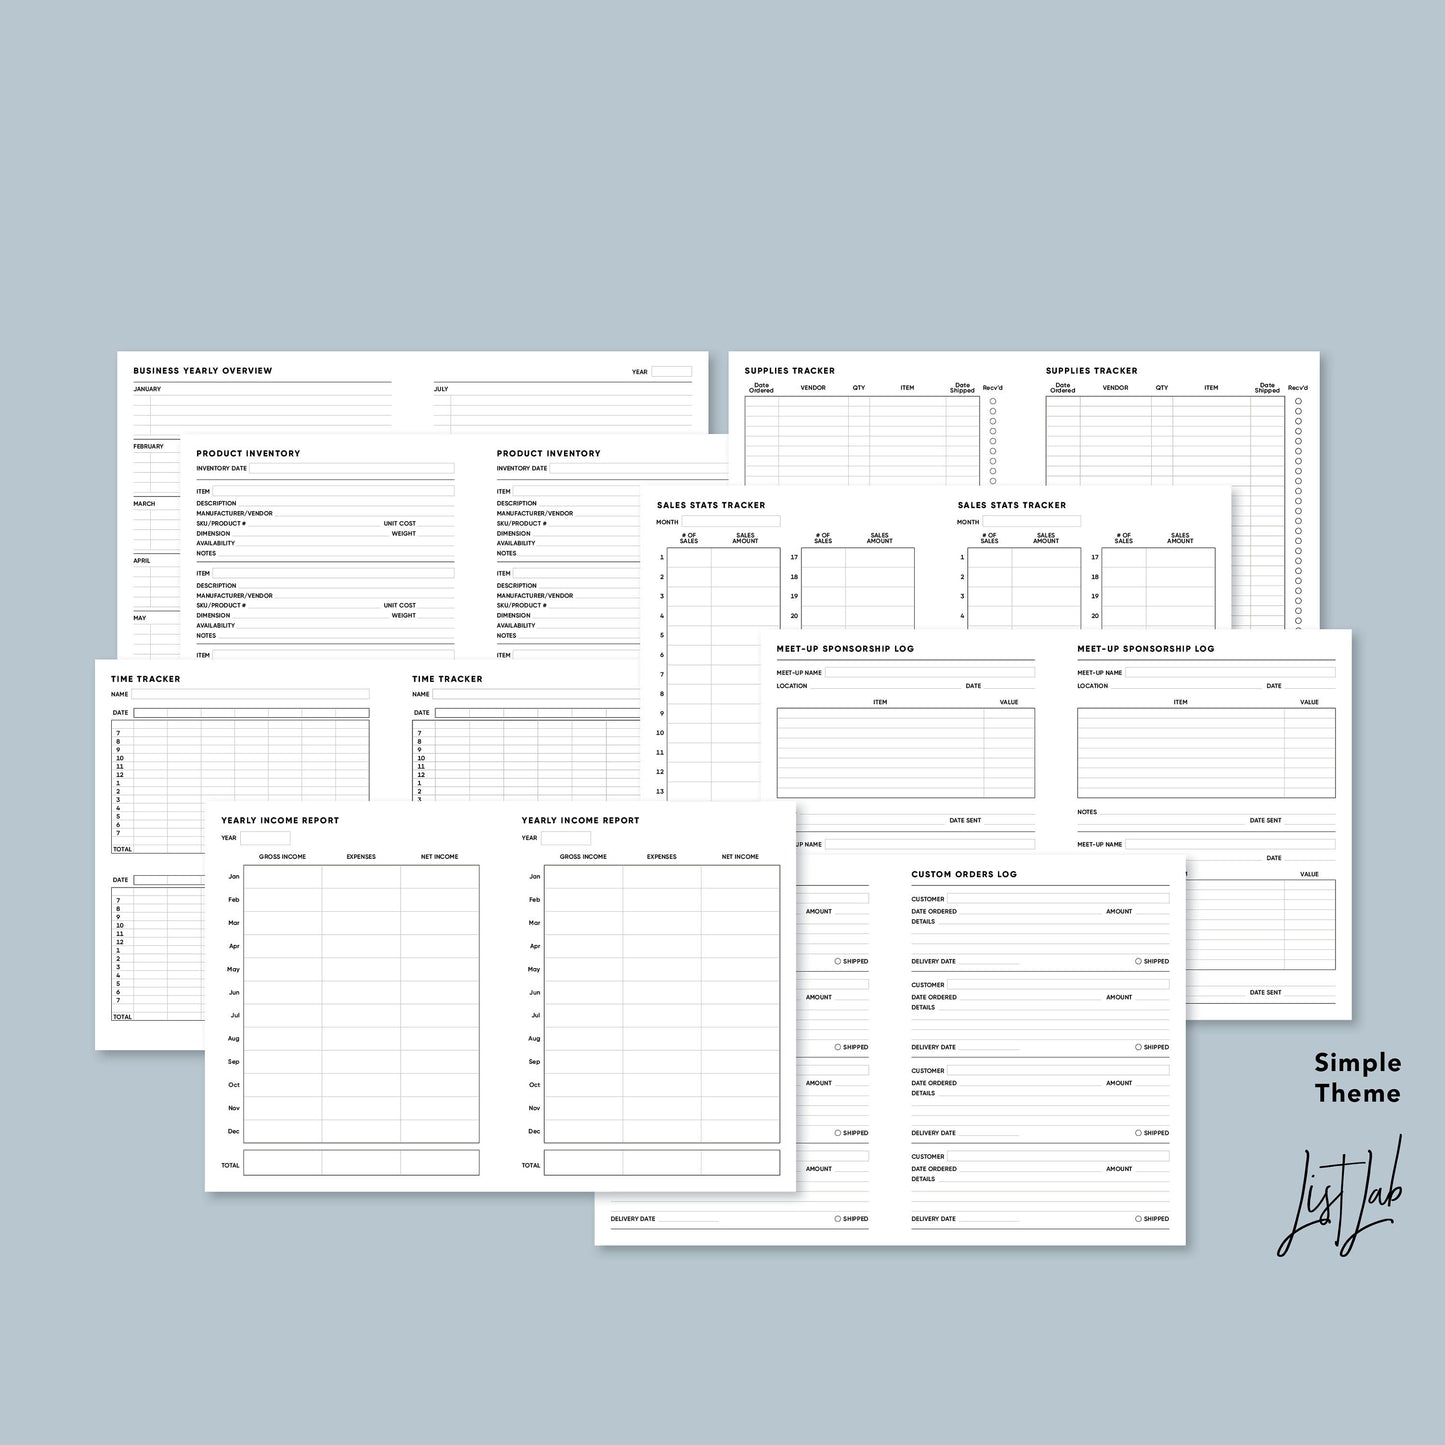 Classic Discbound SMALL BUSINESS KIT Printable Insert Set